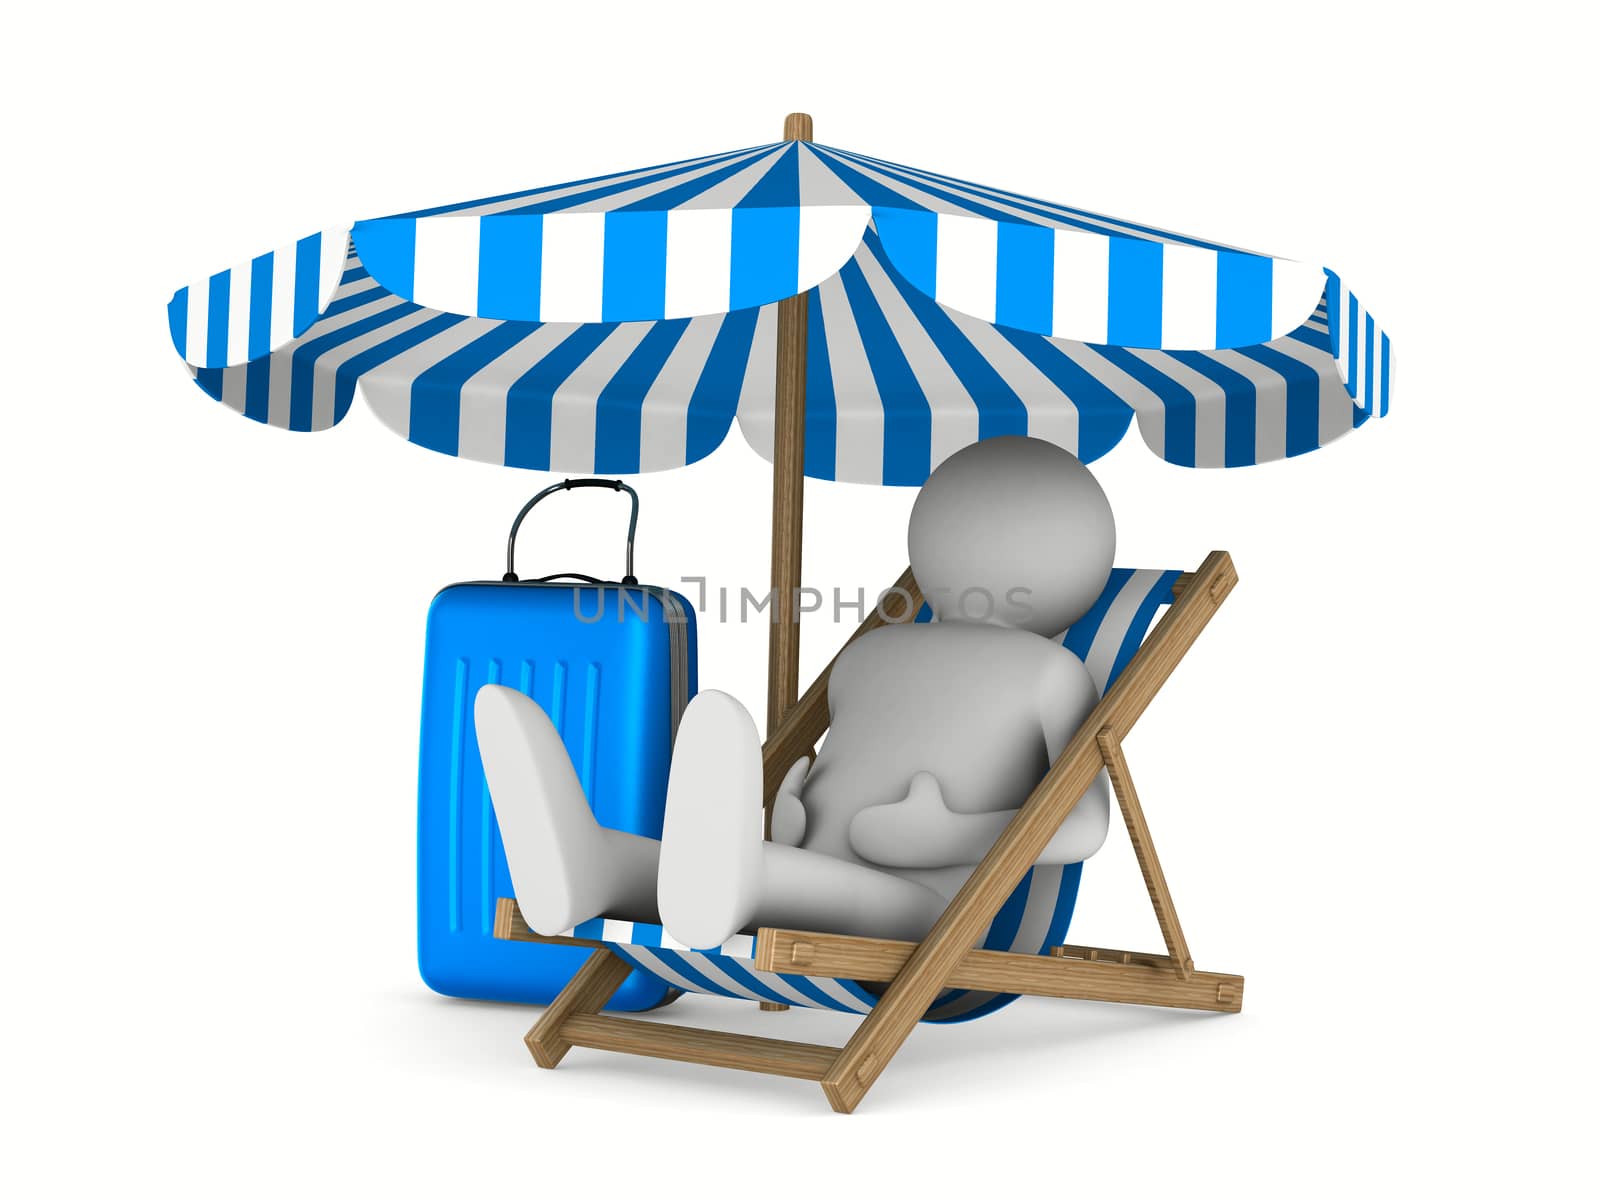 Man on deckchair and luggage on white background. Isolated 3D image